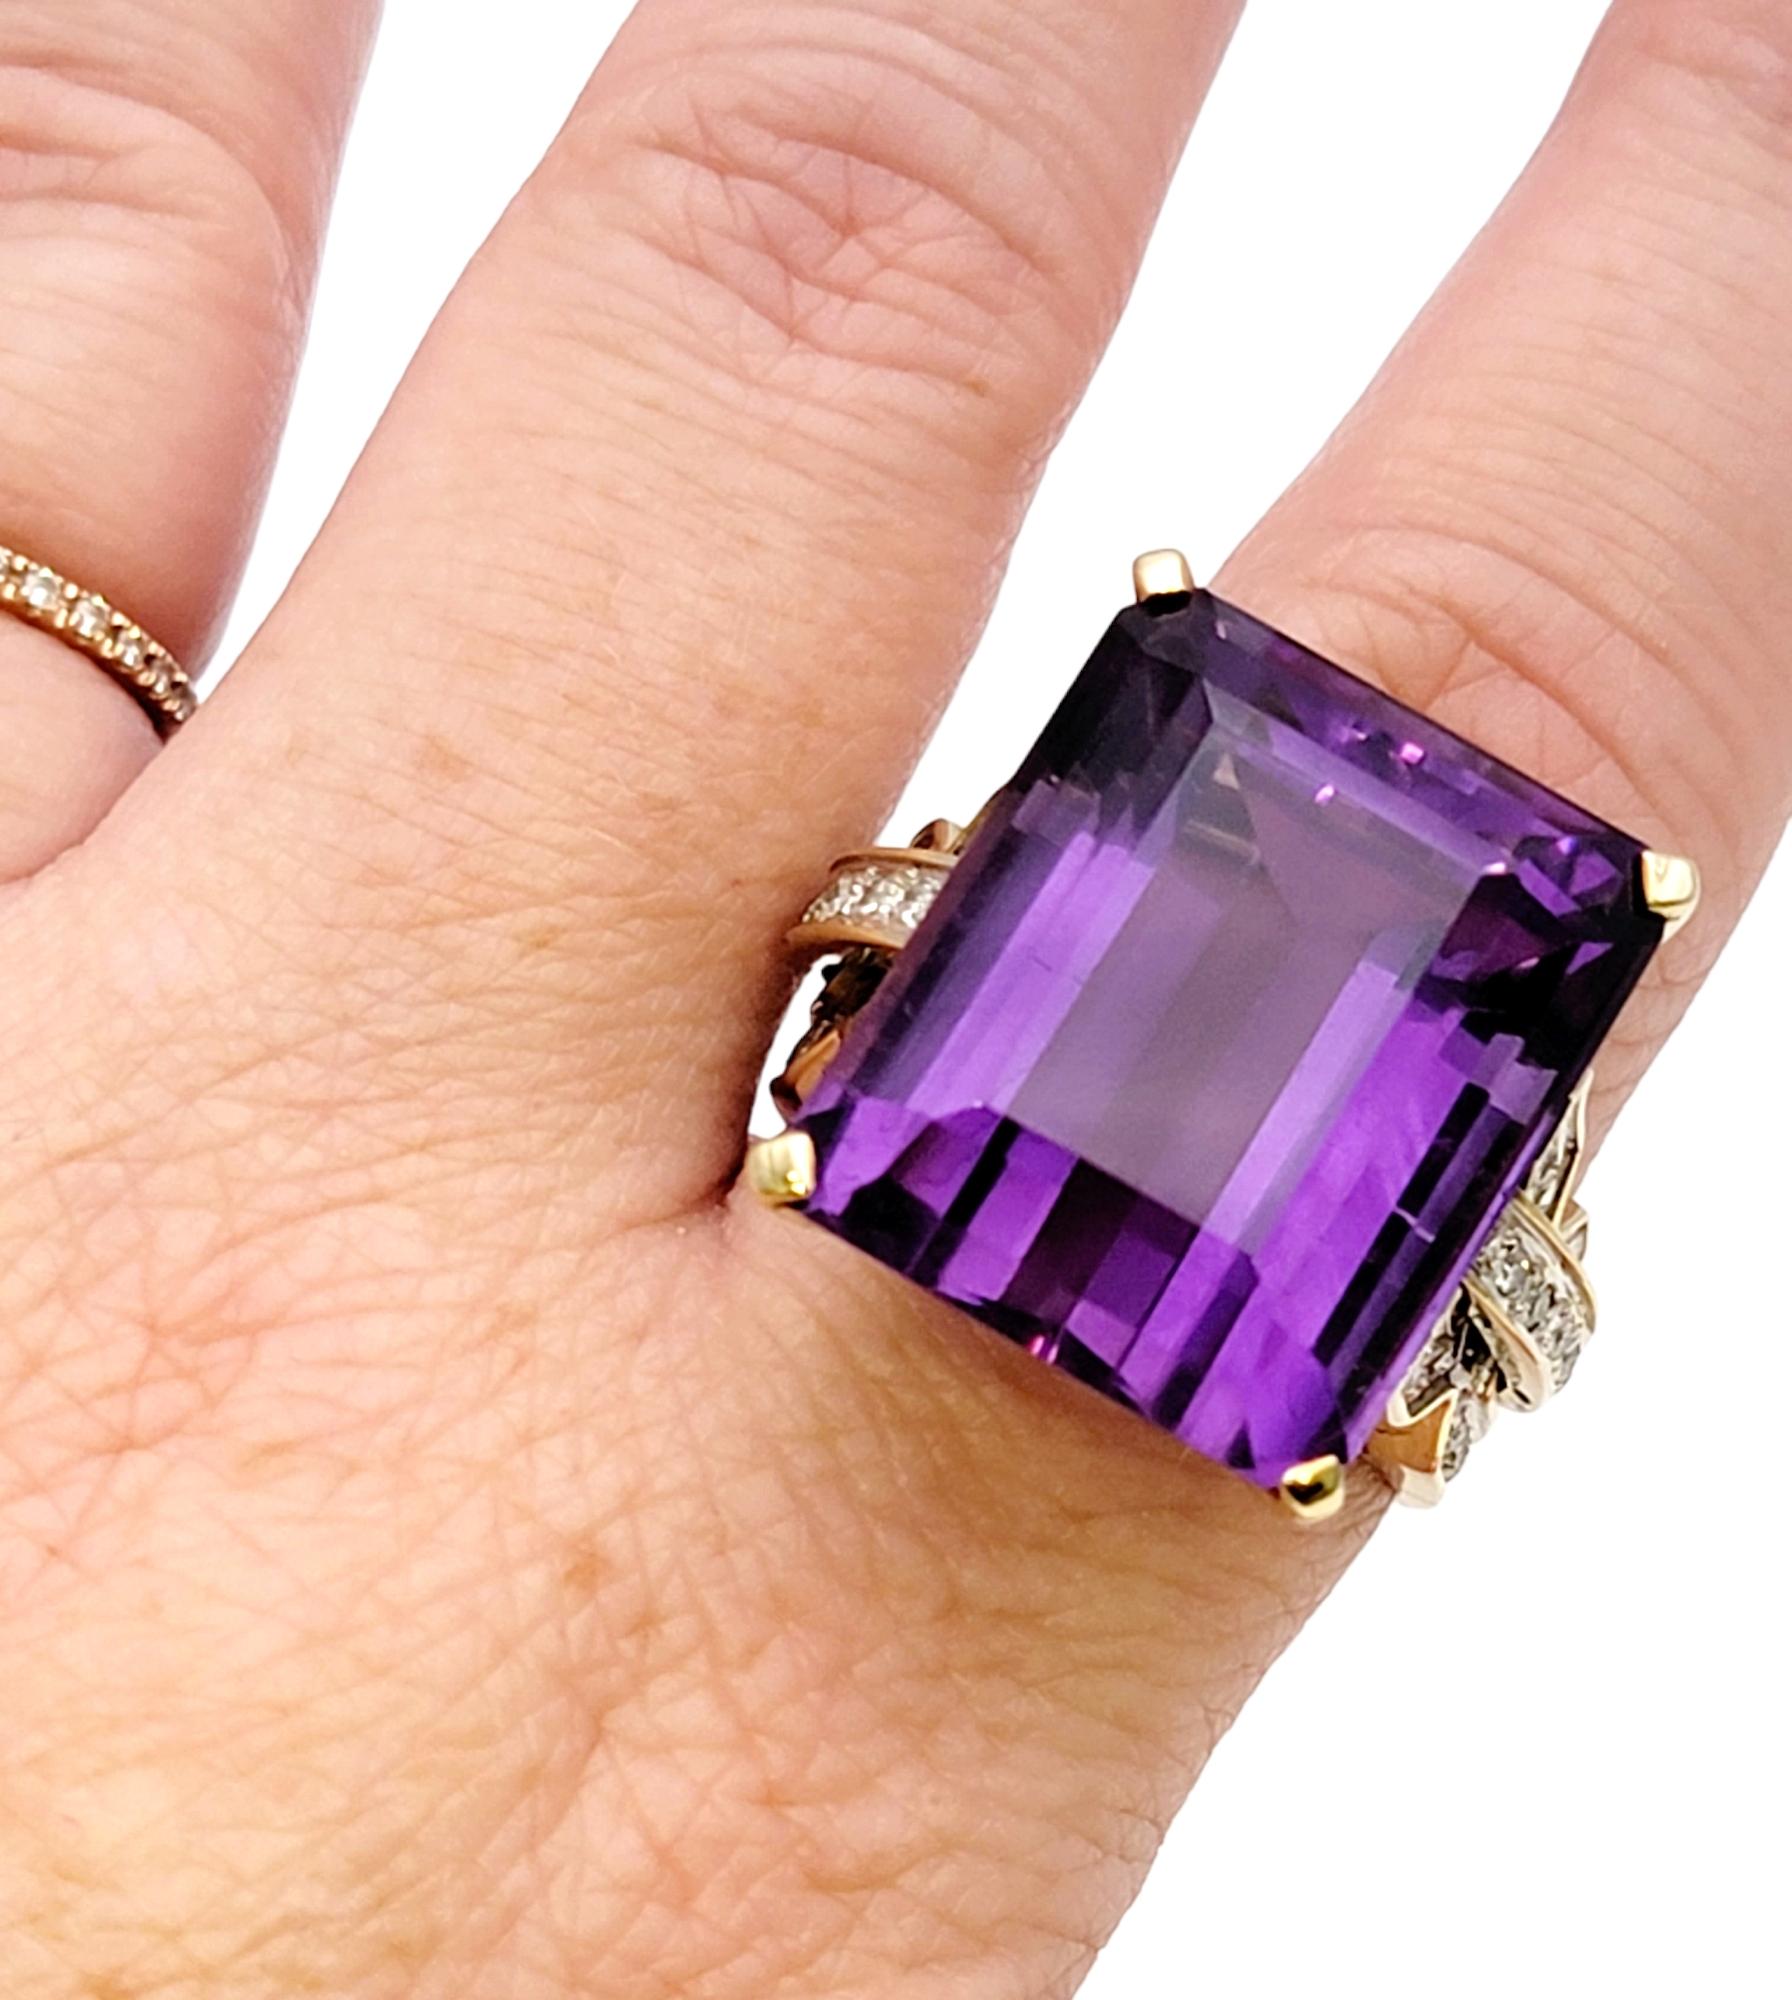 Huge 34.85 Carat Emerald Cut Amethyst Cocktail Ring with Side Diamond Detailing For Sale 7